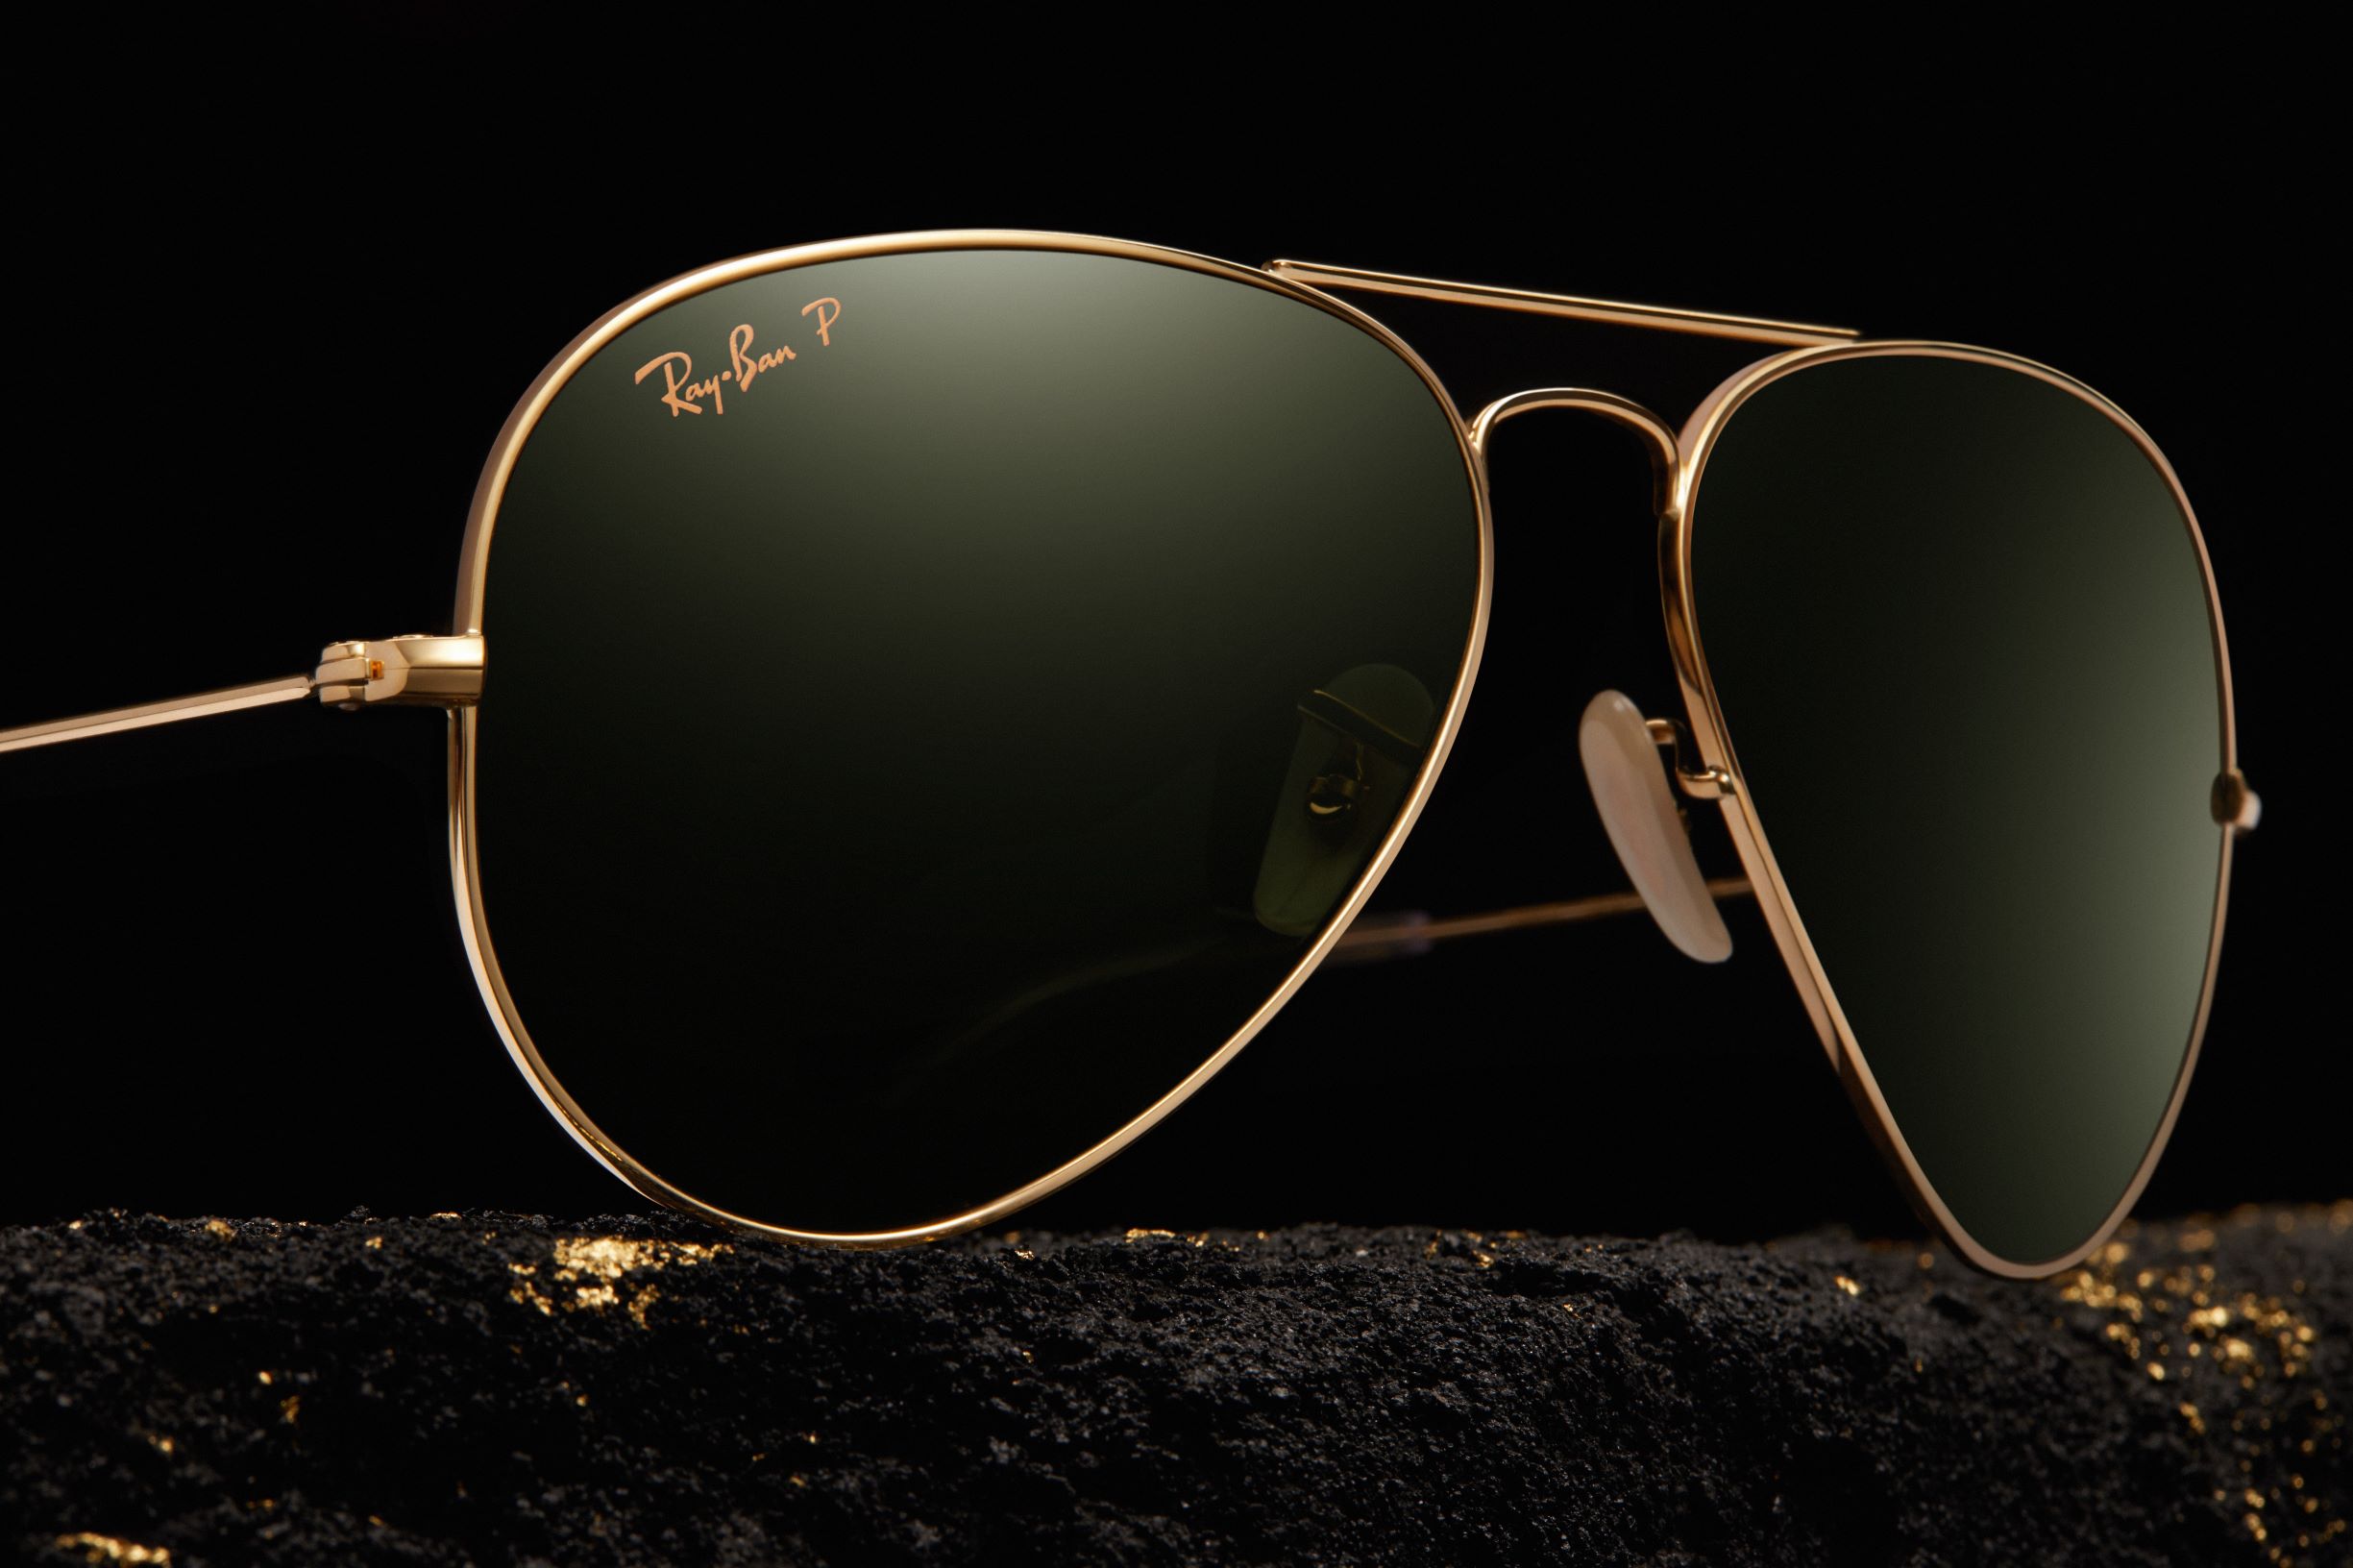 Ray Ban S Iconic Aviator Sunglasses Are Now Available With Solid Gold Frames Maxim Vlr Eng Br